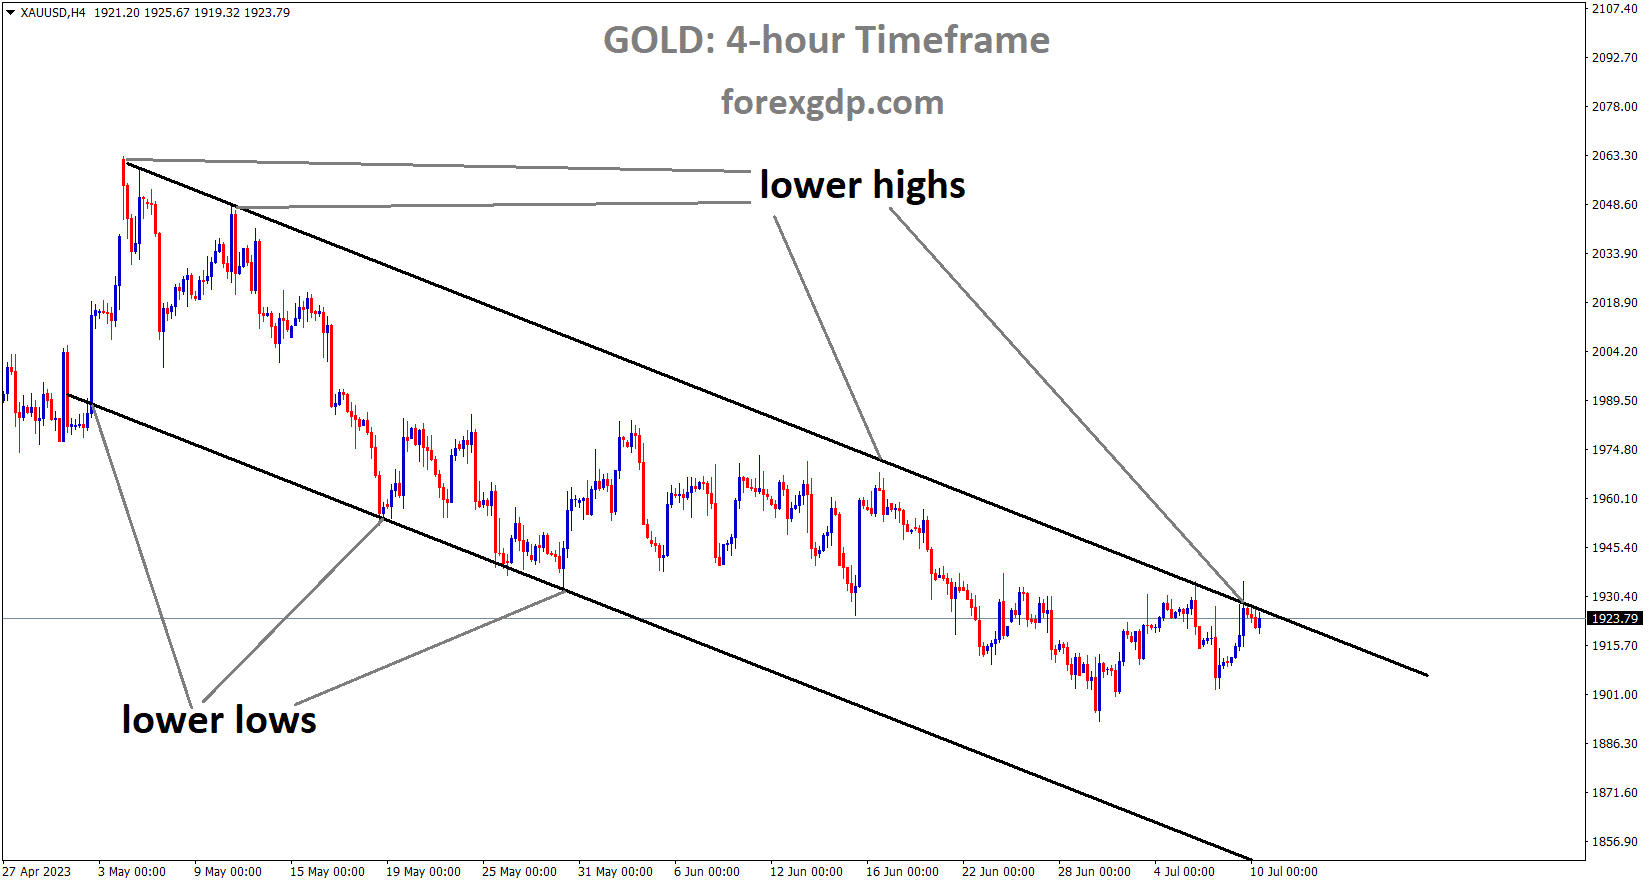 XAUUSD Gold Price is moving in the Descending channel and the market has reached the lower high area of the channel